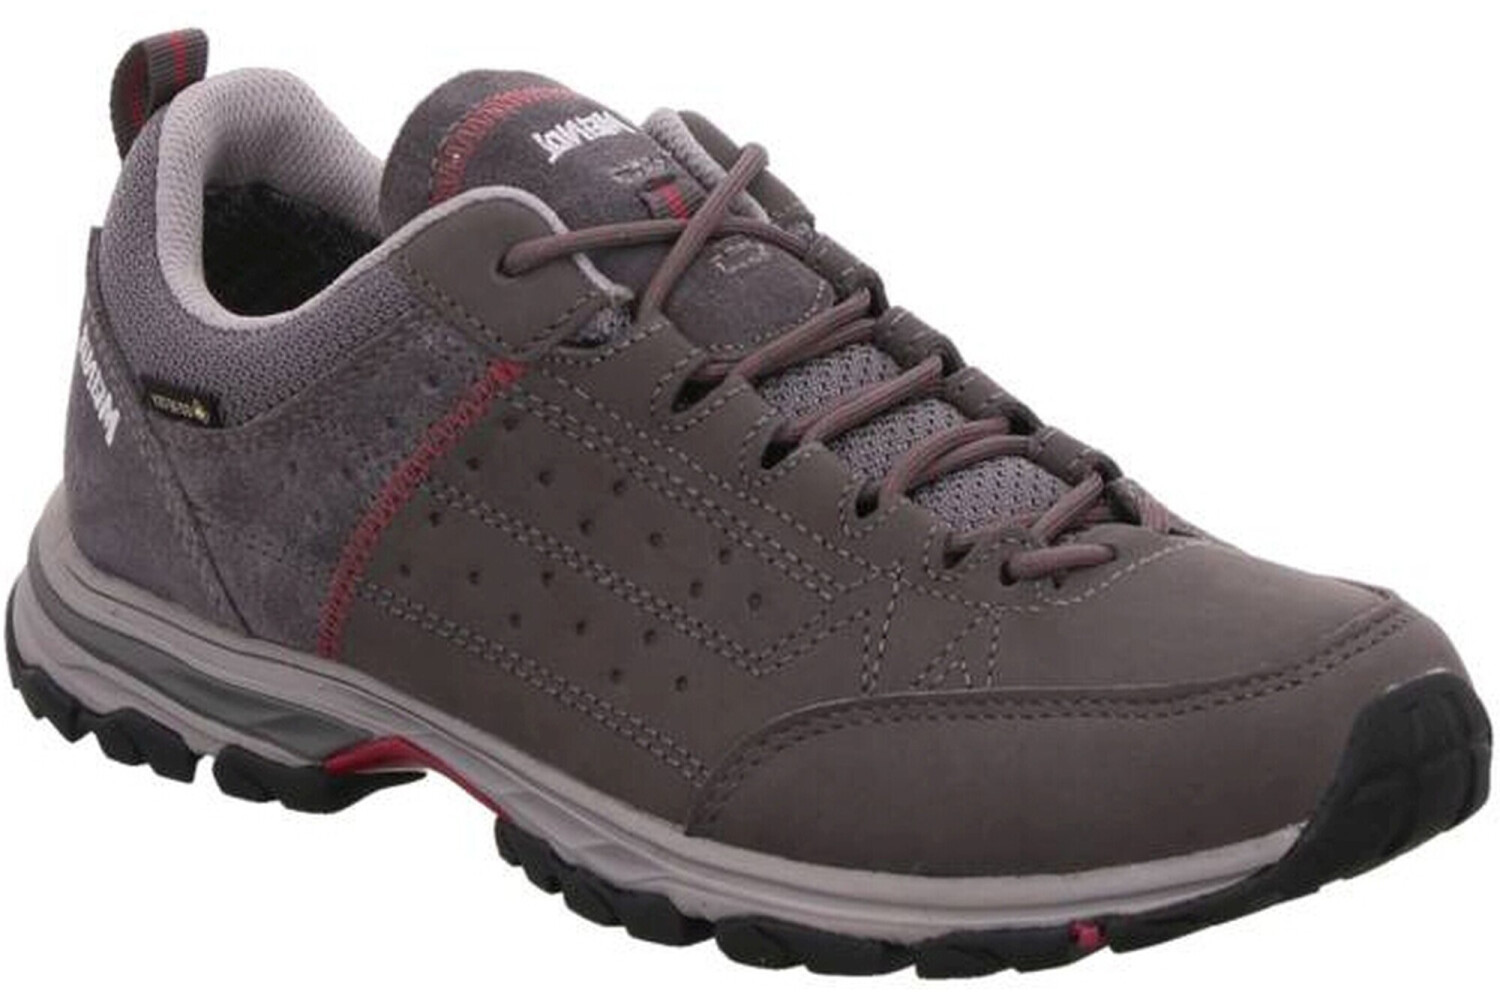 Buy Meindl Durban Lady GTX gray/bordeaux from £120.17 (Today) – Best